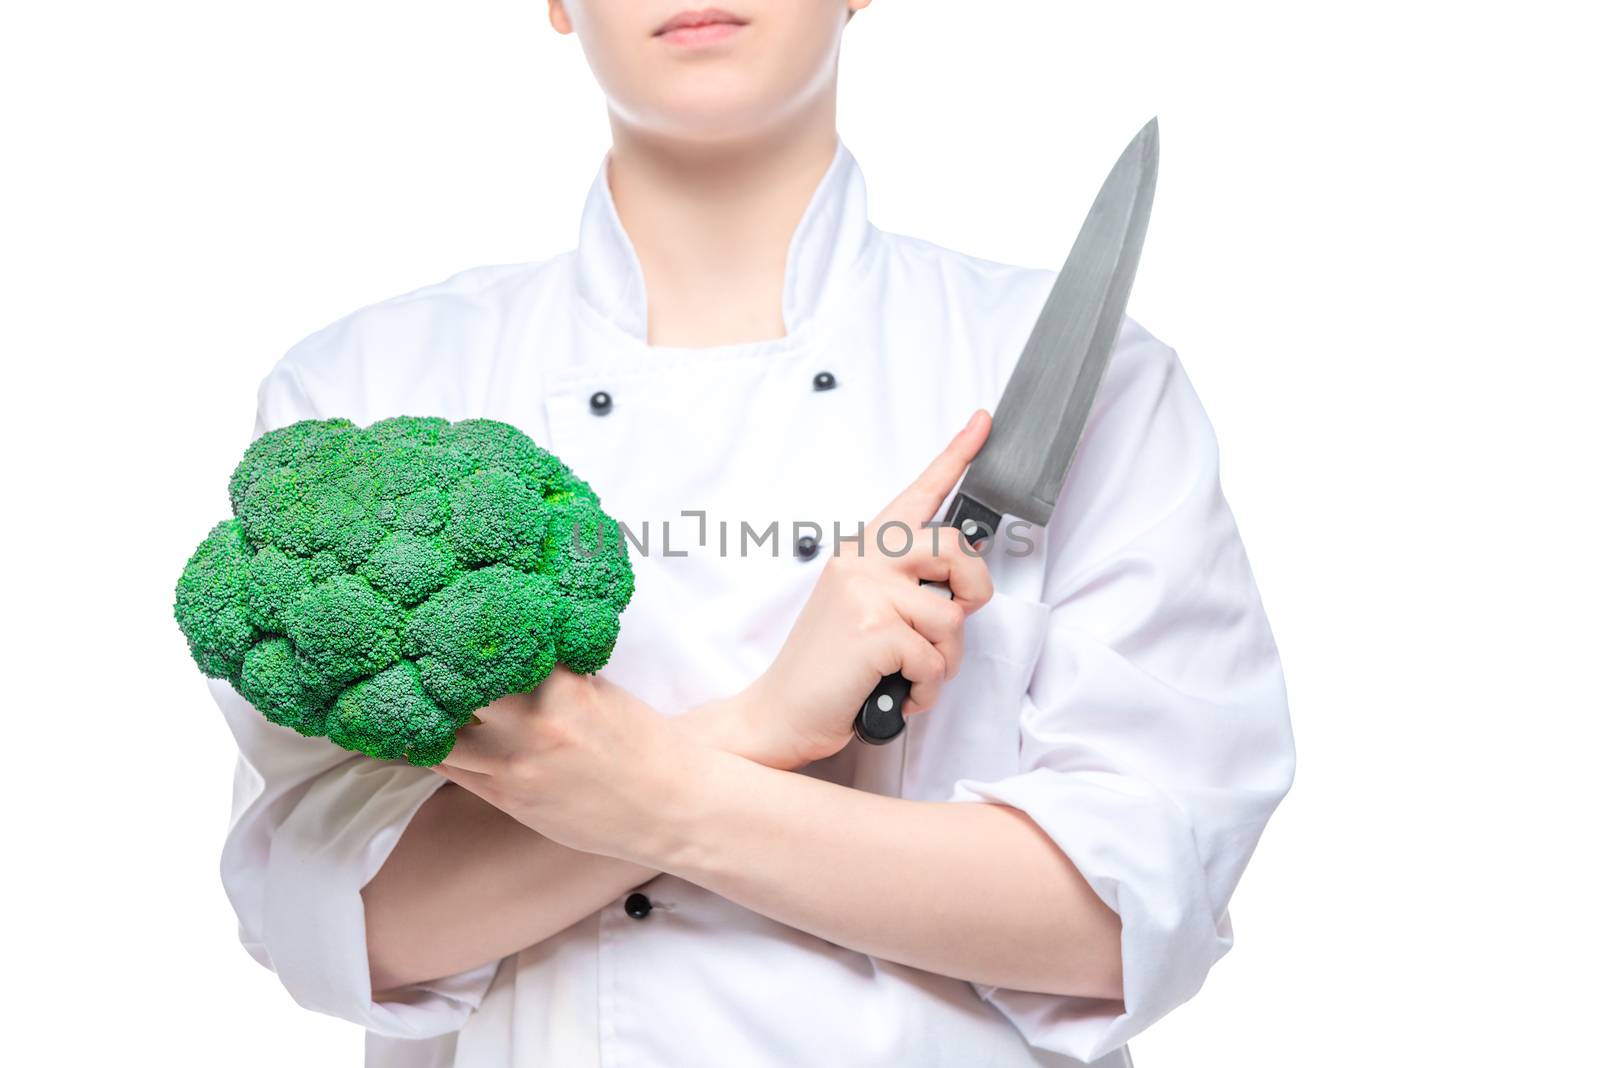 broccoli and a sharp knife in the hands of the cook close-up on by kosmsos111